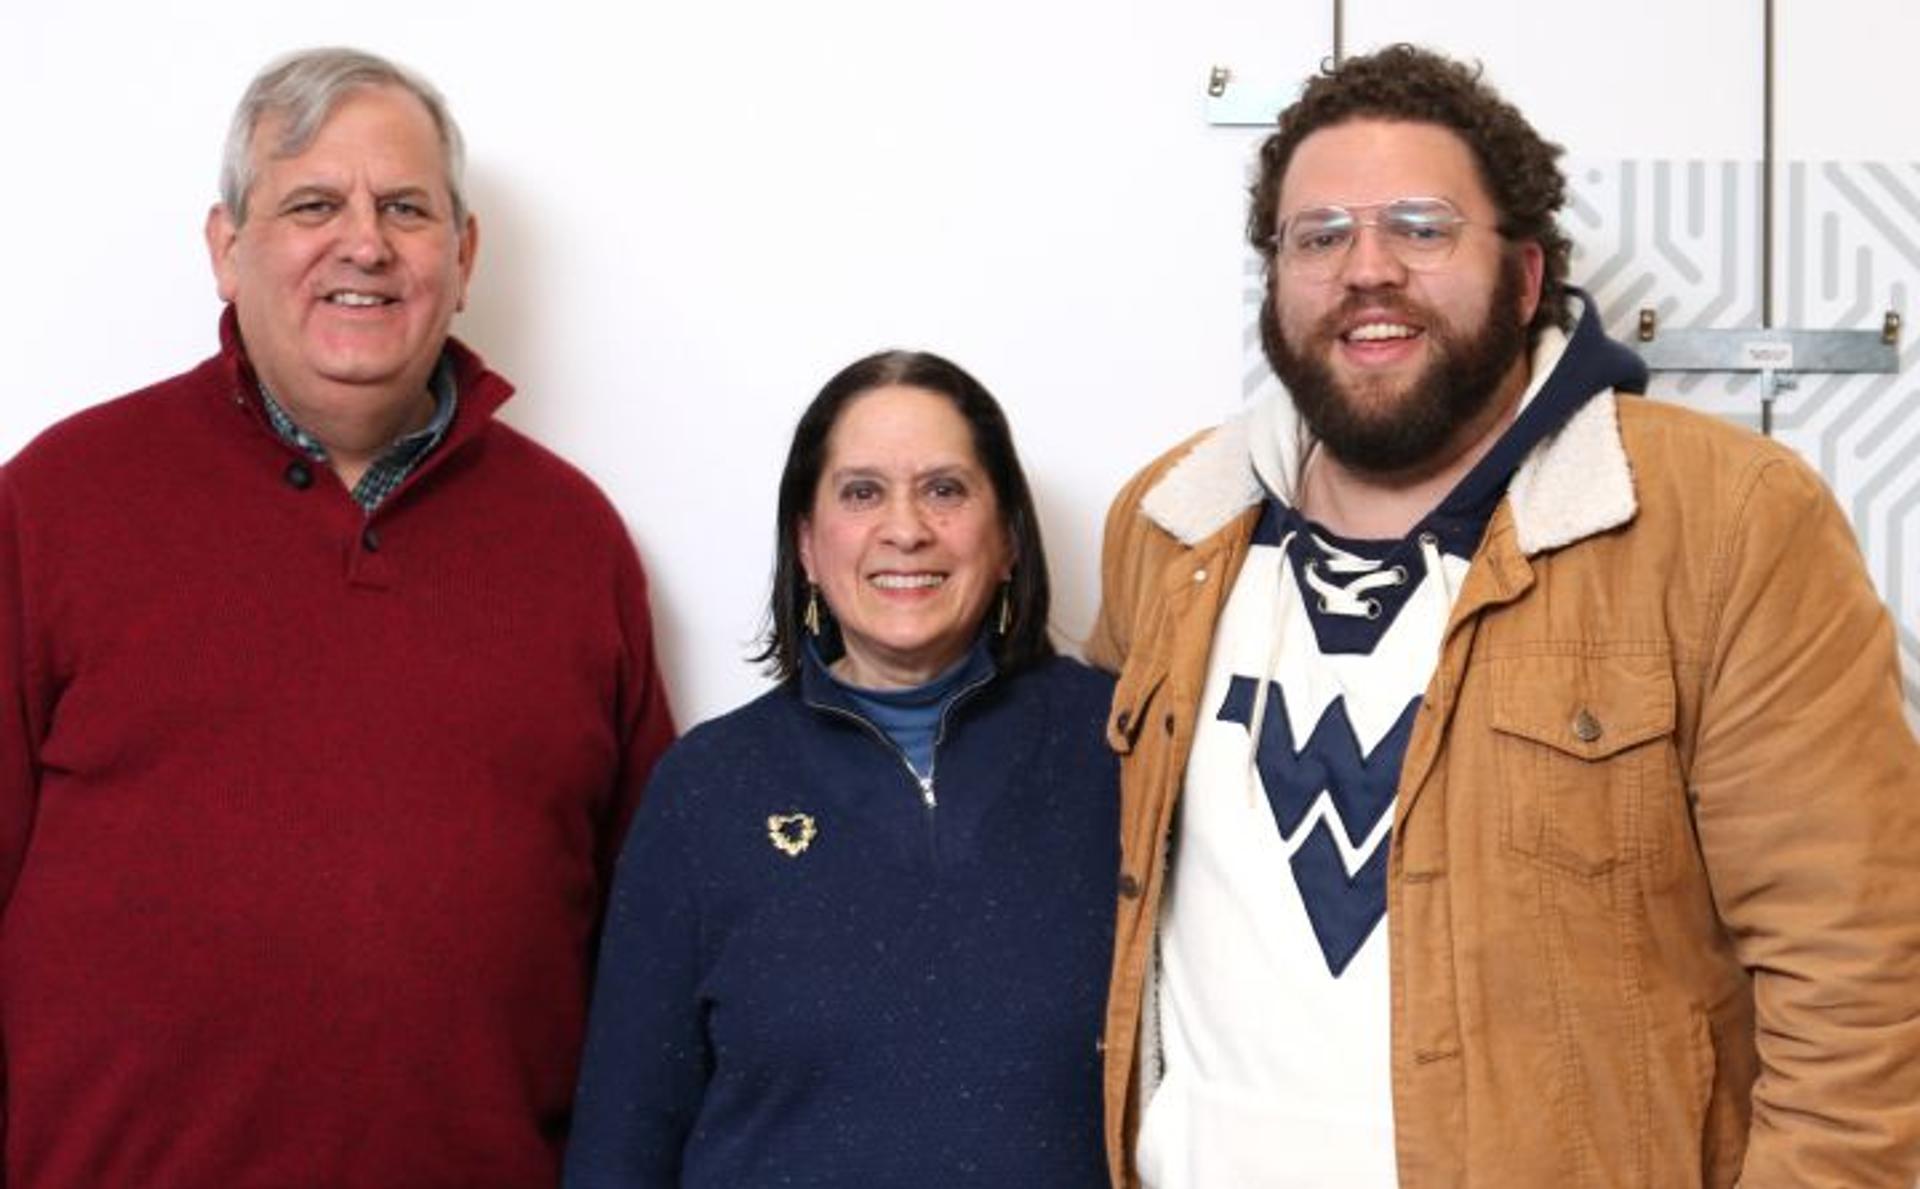 PA Cyber CEO Brian Hayden, author Lee Goldman Kikel, and her son Jason stand side-by-side